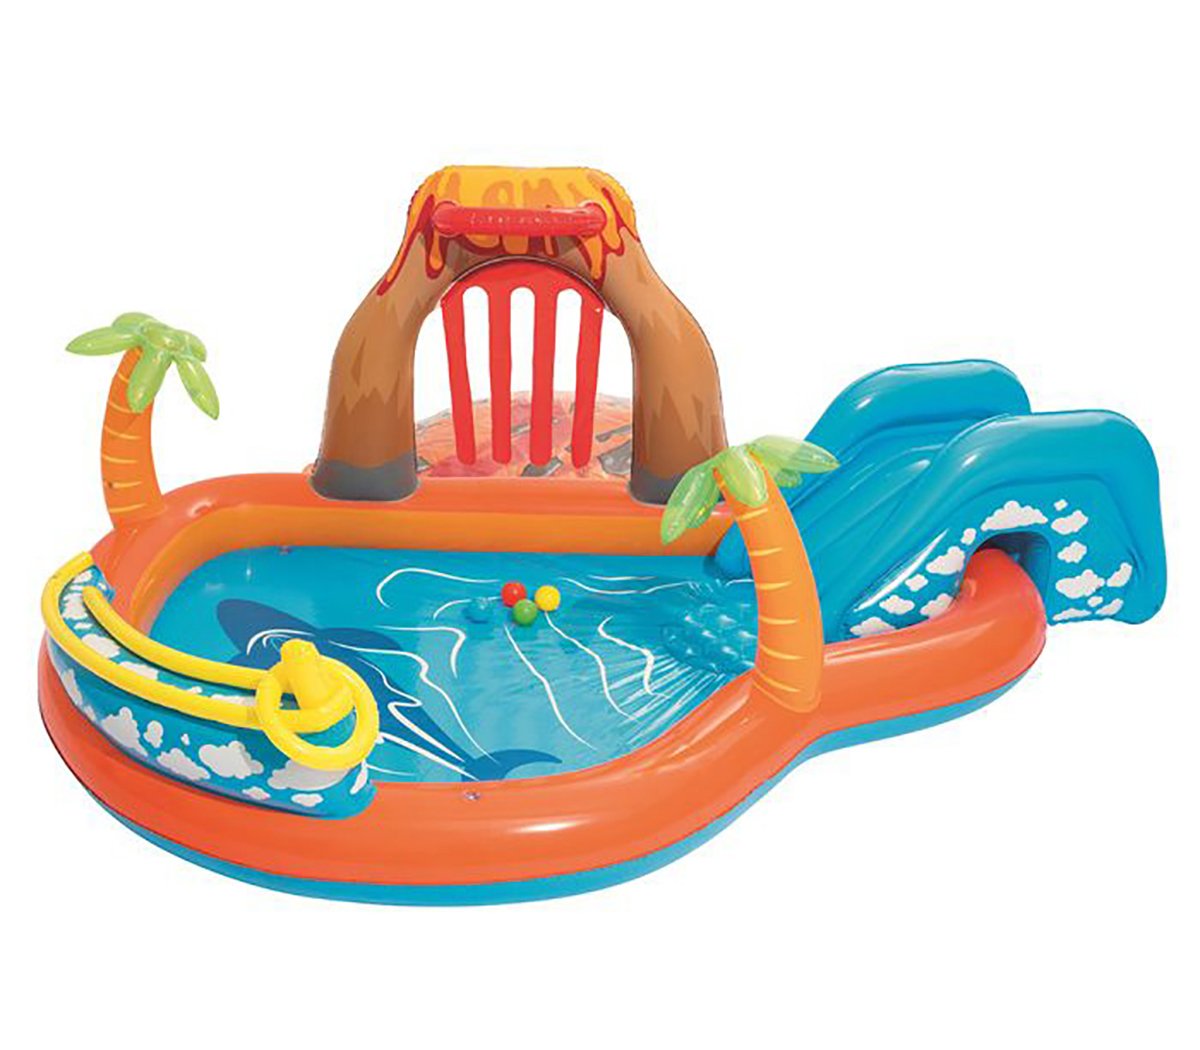 Chad Valley 8.5ft Volcano Activity Kids Paddling Pool - 208L